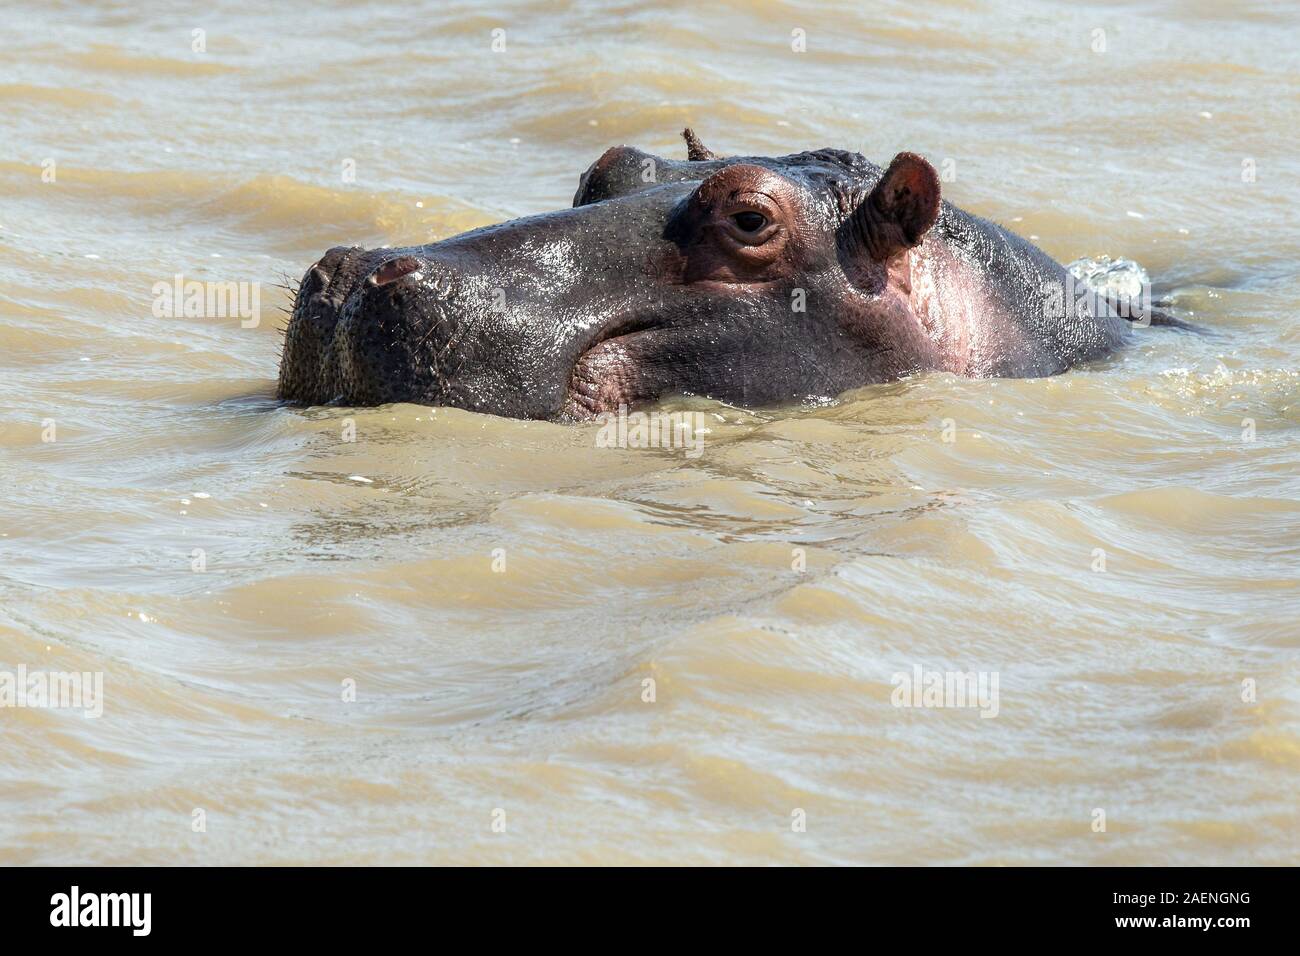 Single hippo head sticking up out of water, mouth closed. Stock Photo